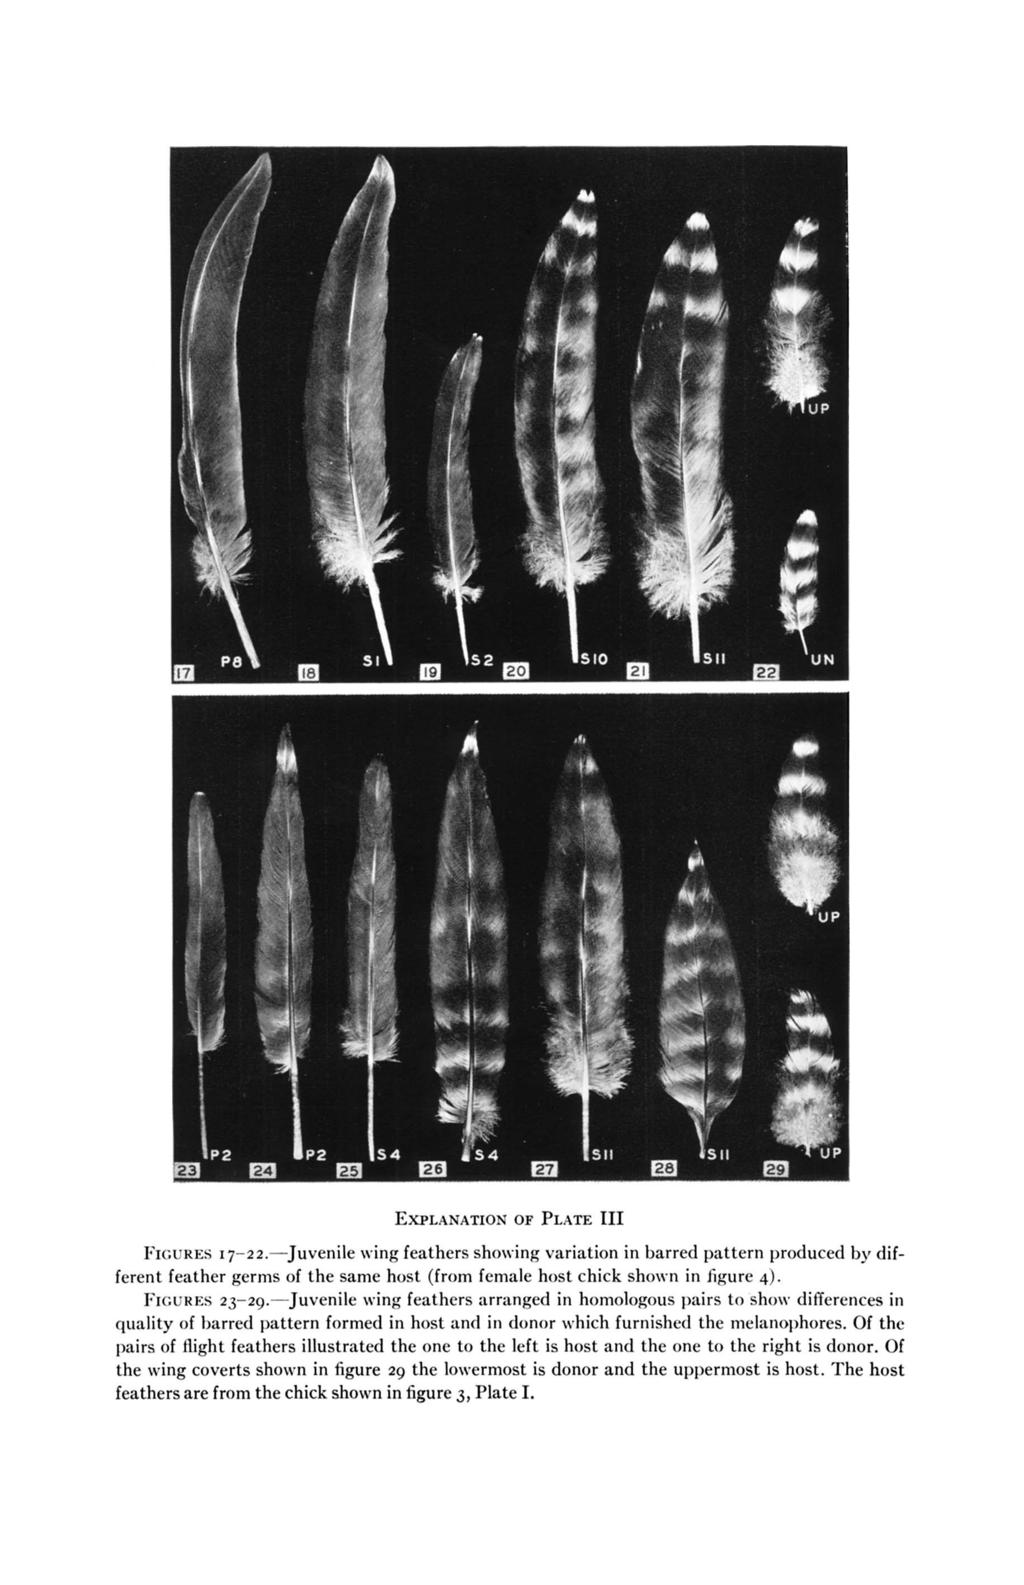 EXPLANATION OF PLATE I11 FIGURES I 7-2z.-Juvenile wing feathers showing variation in barred pattern produced by different feather germs of the same host (from female host chick shown in figure 4).